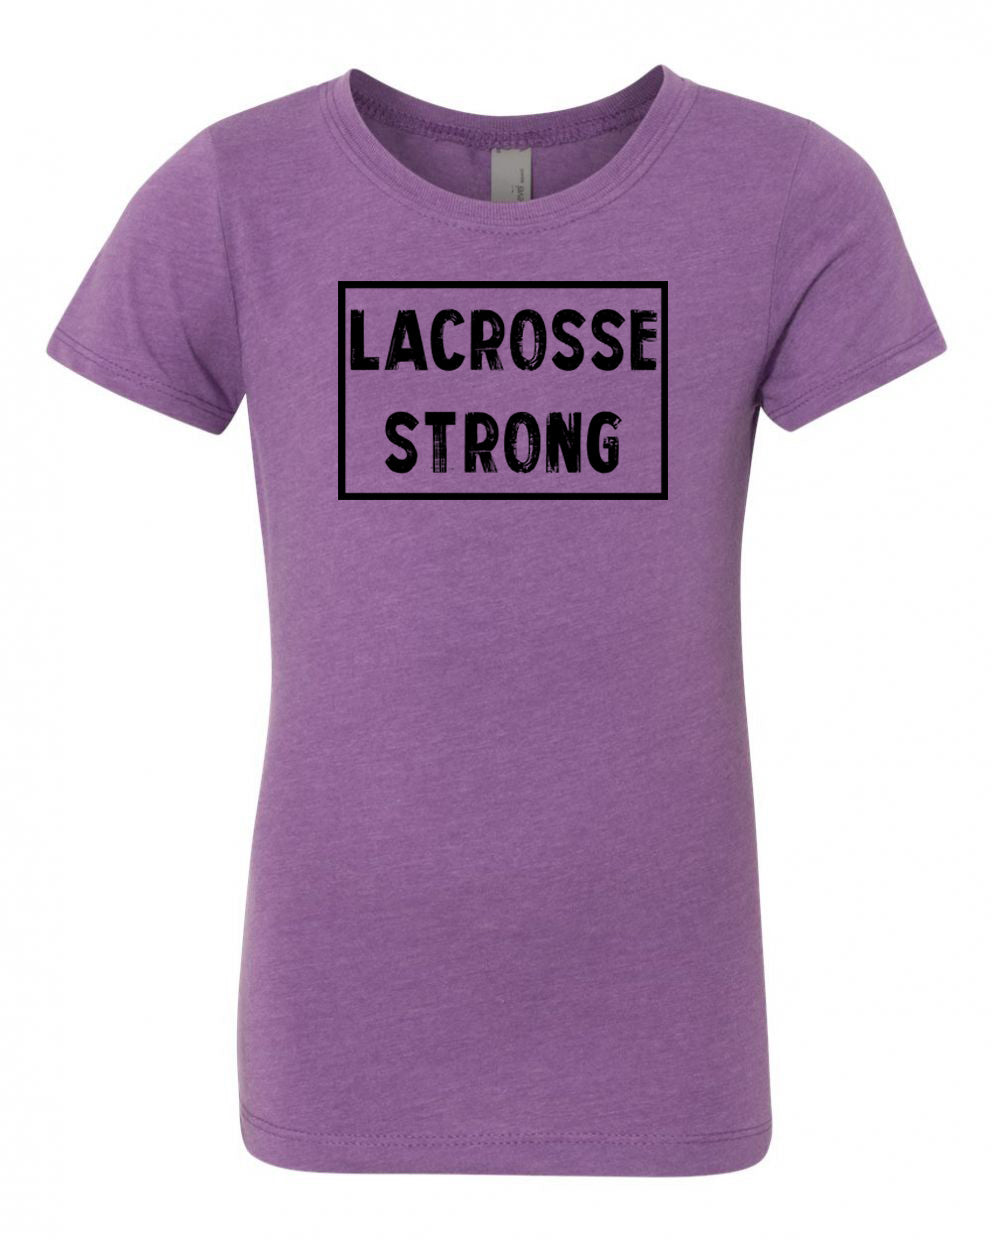 Purple Berry Lacrosse Strong Girls Lacrosse T-Shirt With Lacrosse Strong Design On Front